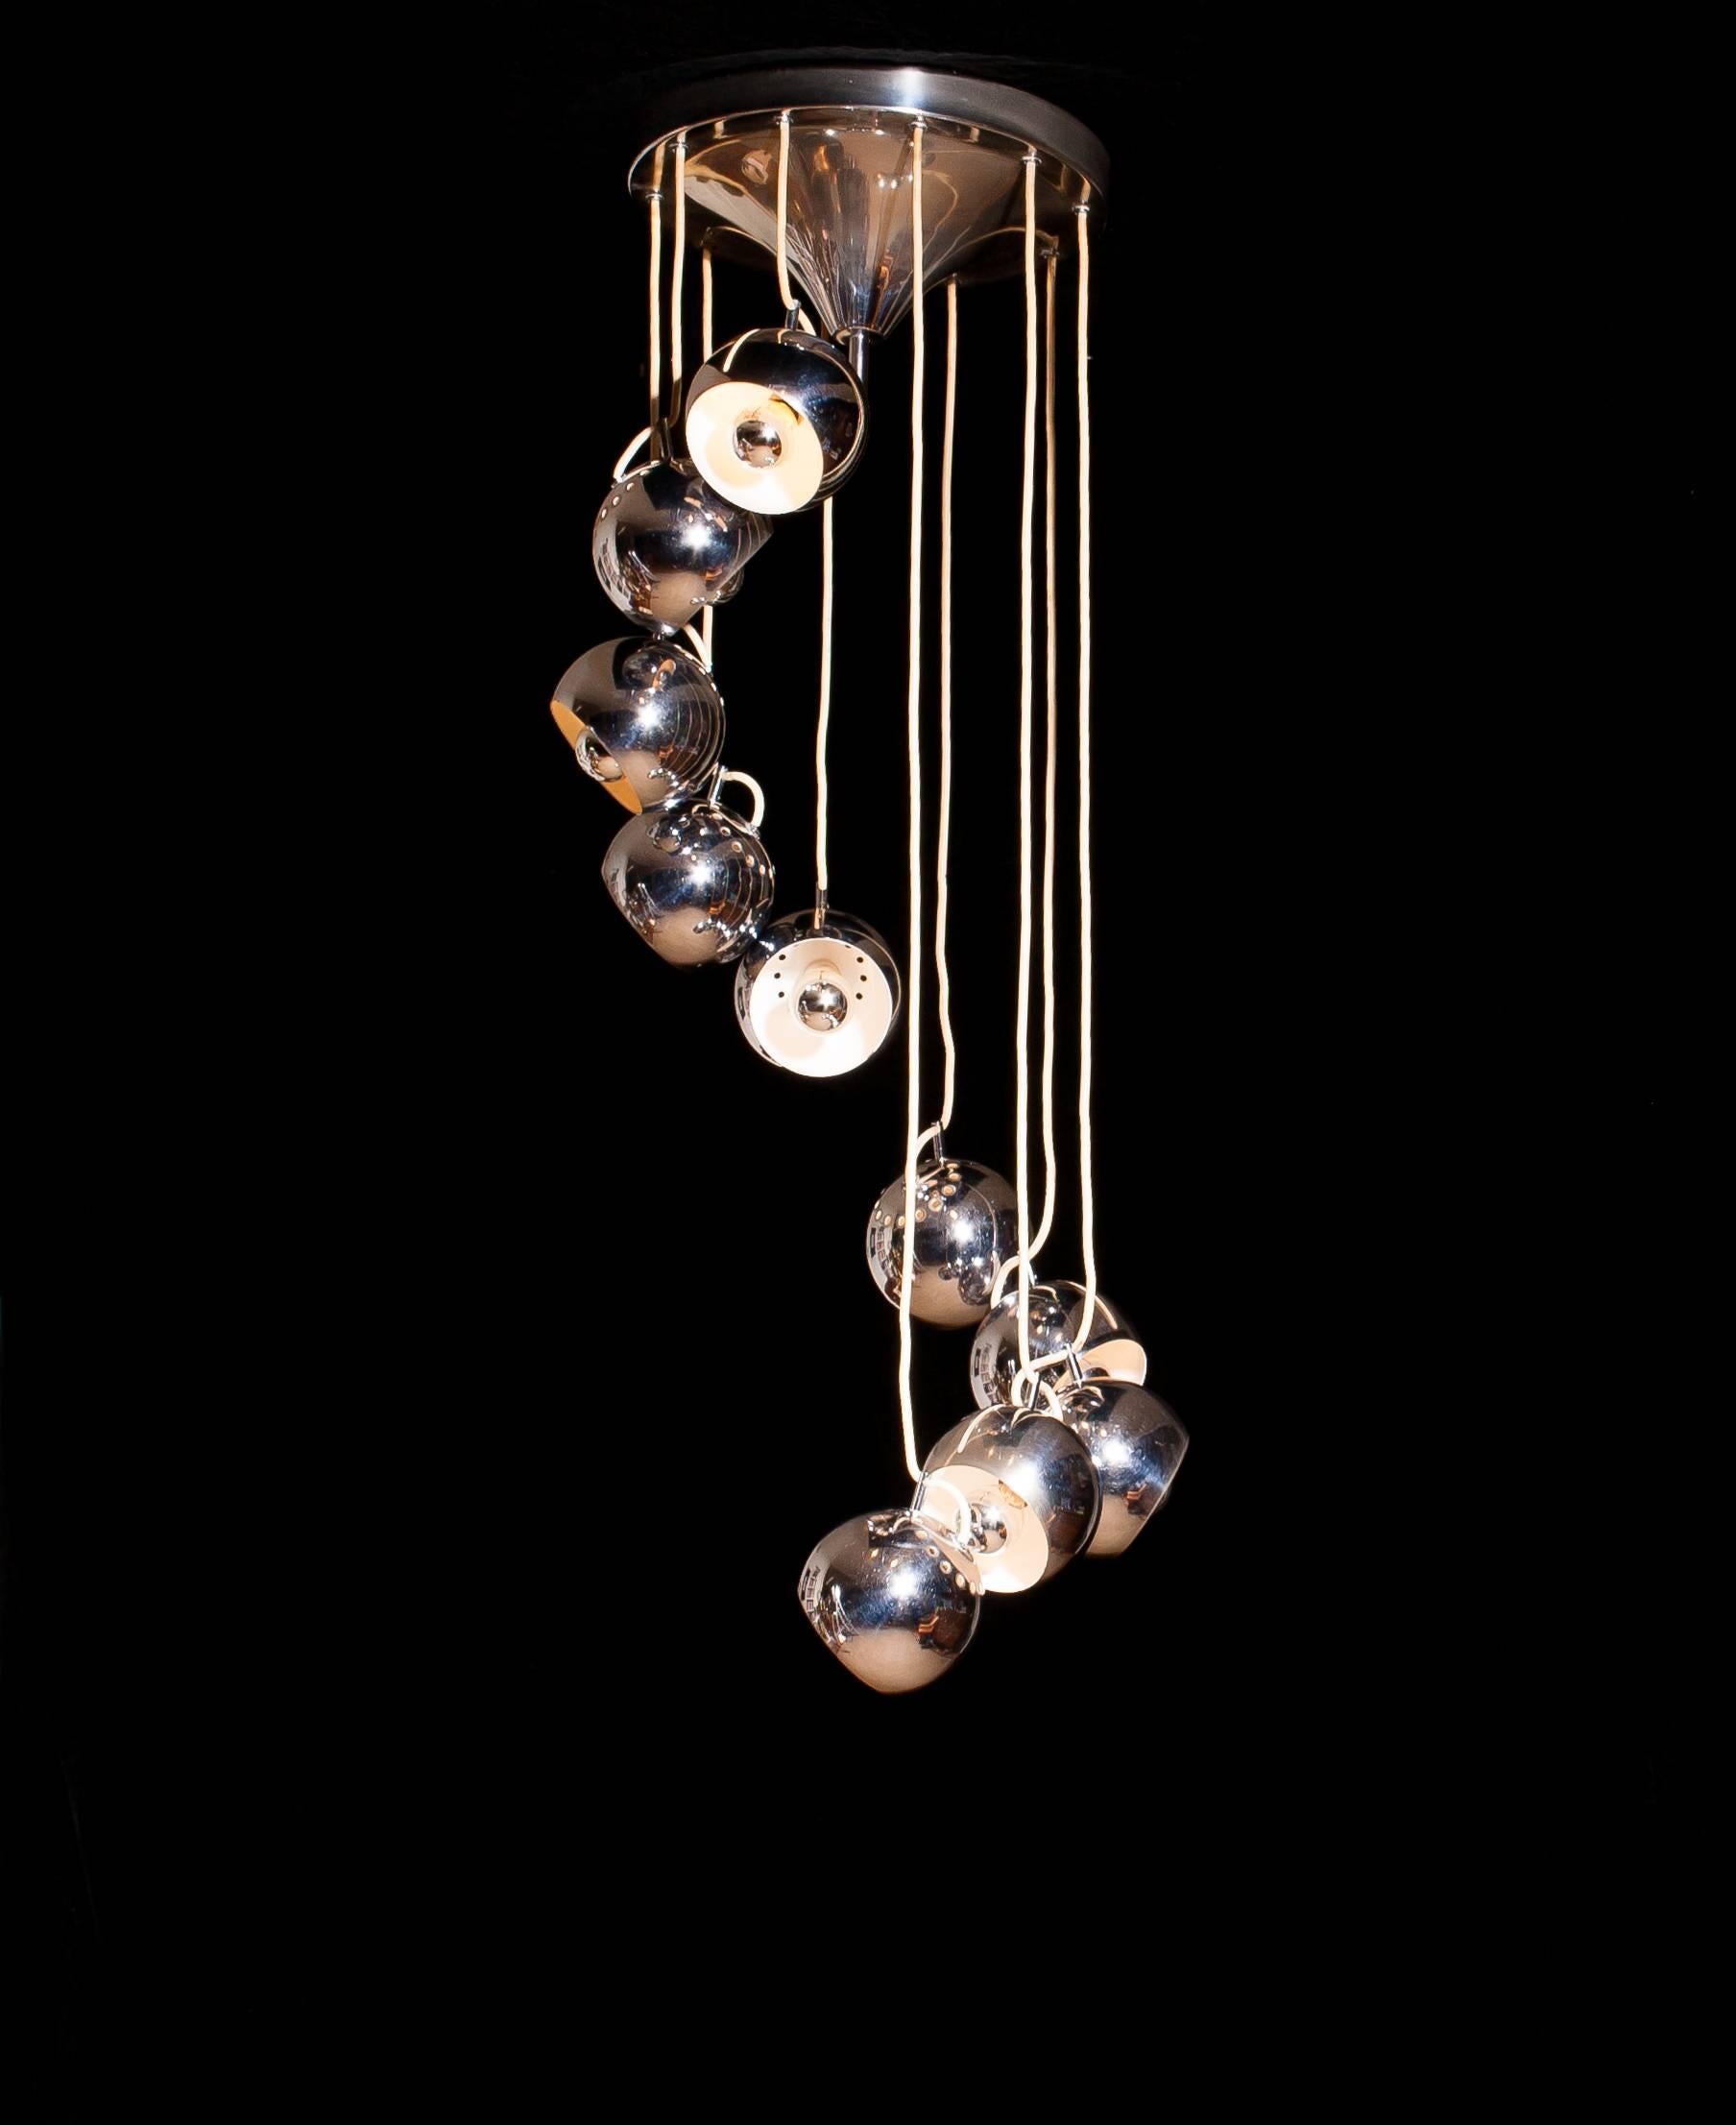 Impressive waterfall chandelier by Lampadari Reggiani with ten adjustable chromed globes hanging on a chromed trompet chapel dish ø32 cm. All in perfect condition.
The ø of the globes is 12 cm.

We offer a free service to re-cable the globes in